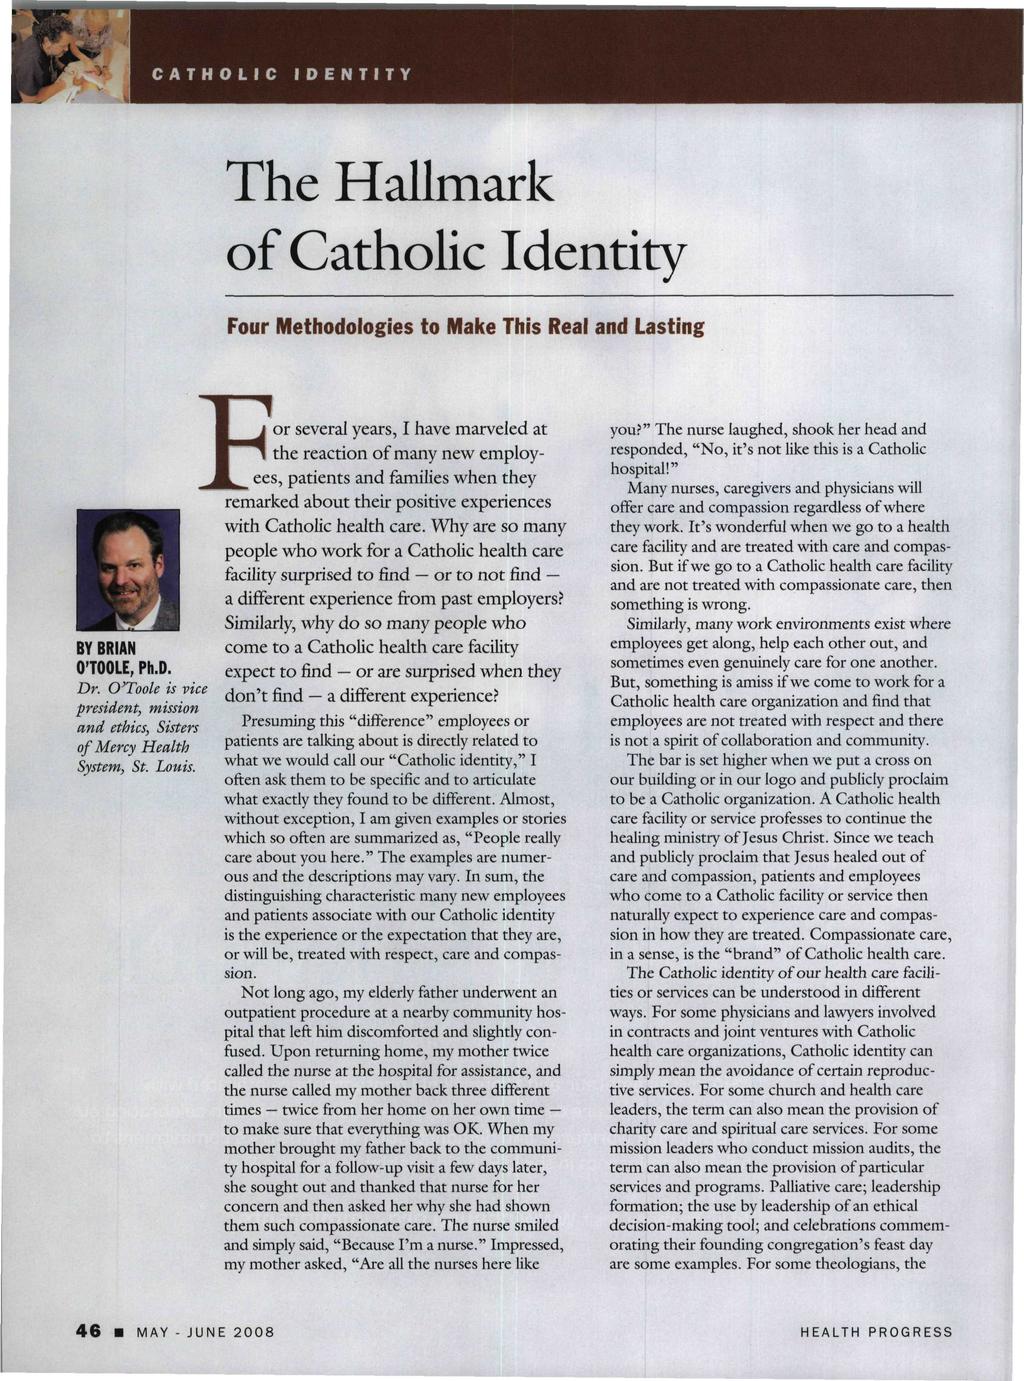 CATHOLIC IDENTITY The Hallmark of Catholic Identity Four Methodologies to Make This Real and Lasting BY BRIAN O'TOOLE, Ph.D. Dr.